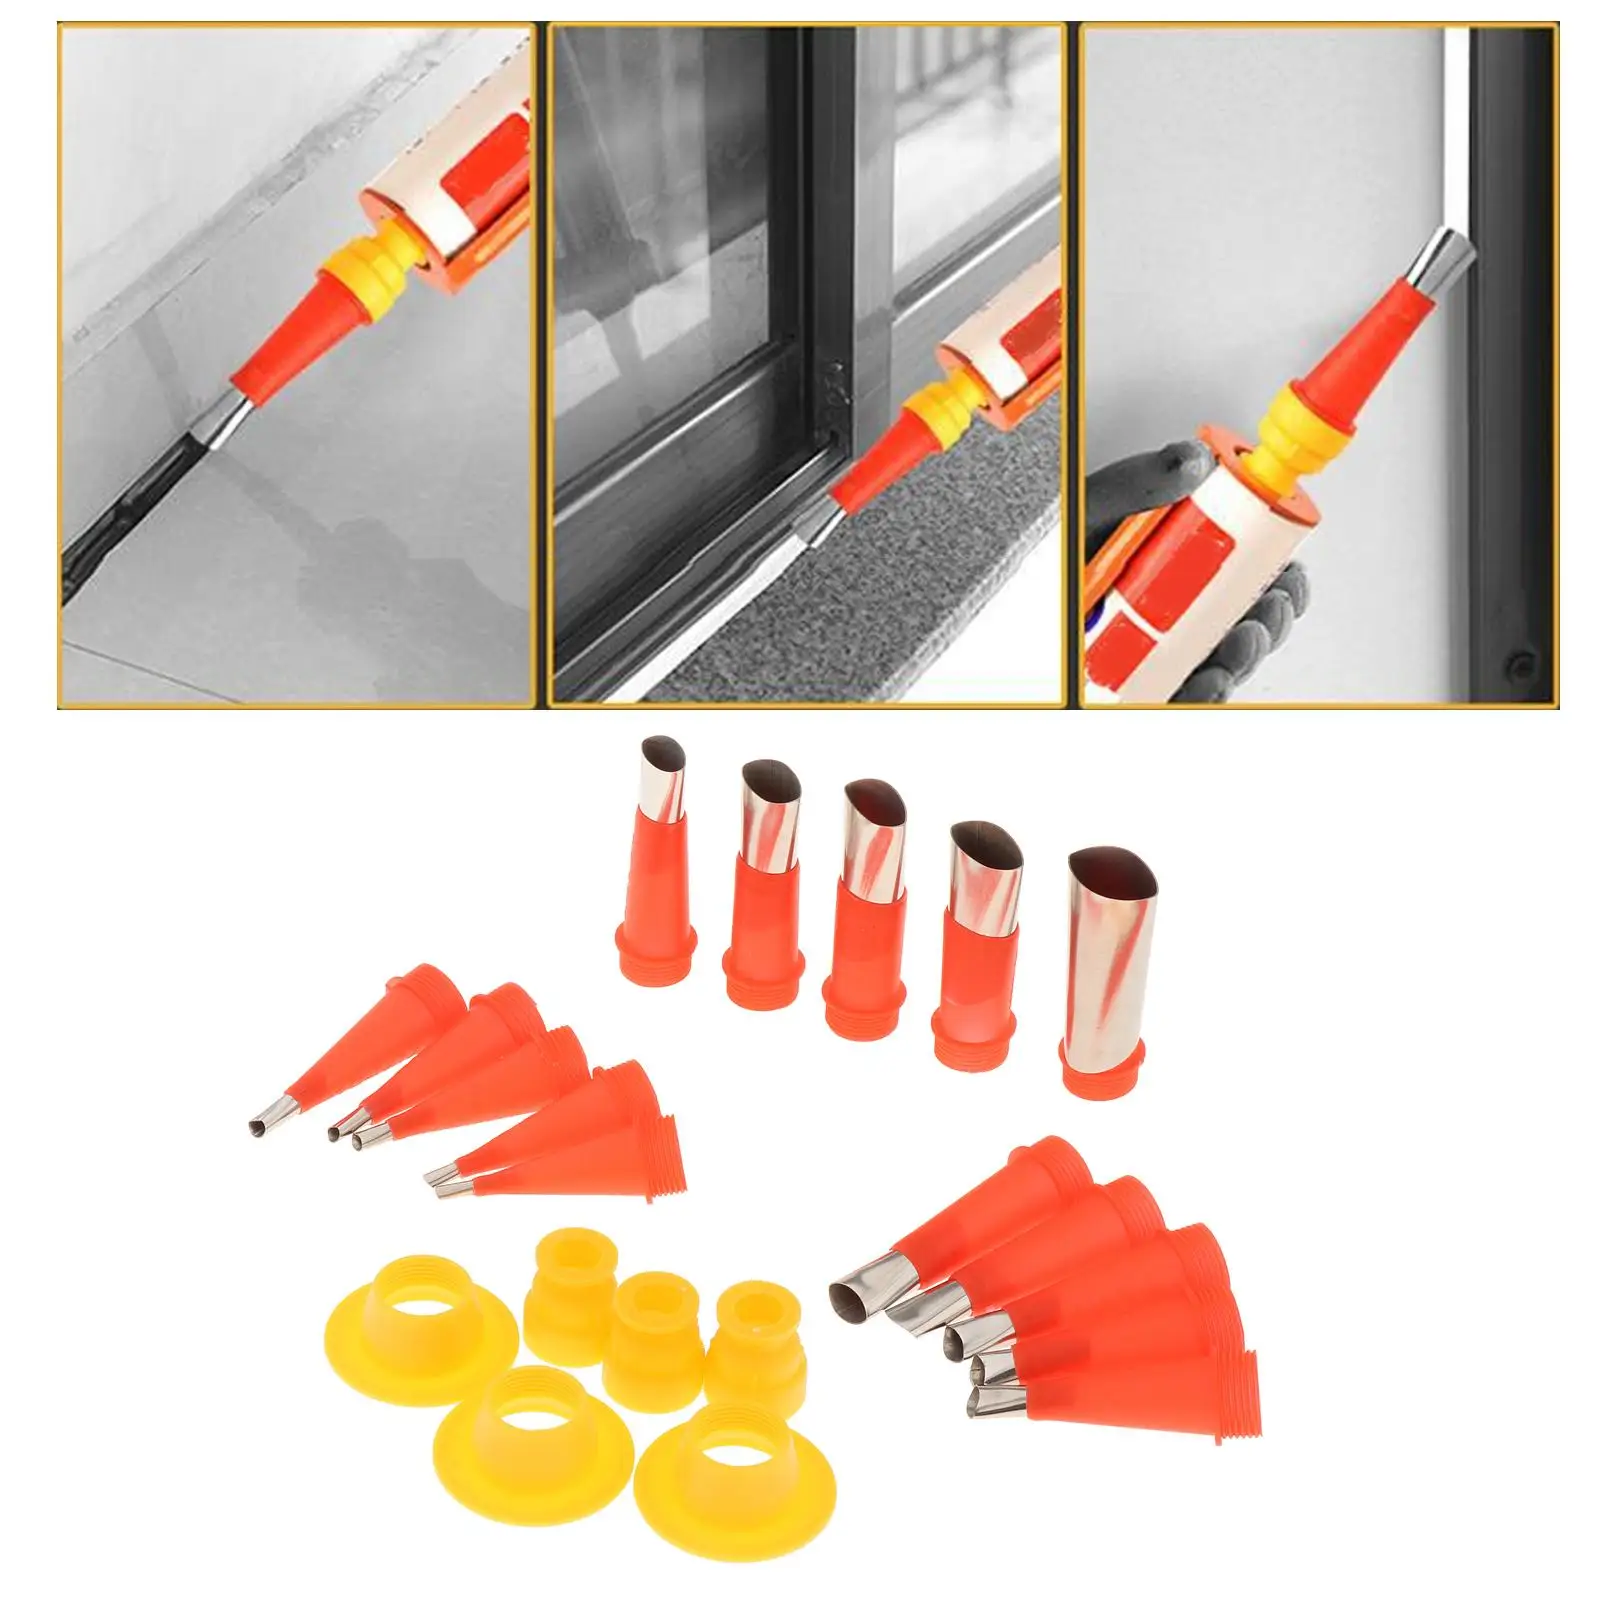 21Pcs Reusable Caulking Nozzle Applicator Replacement with Bases Caulking Finisher Nozzle Kit for Sausage Bathroom Door Kitchen